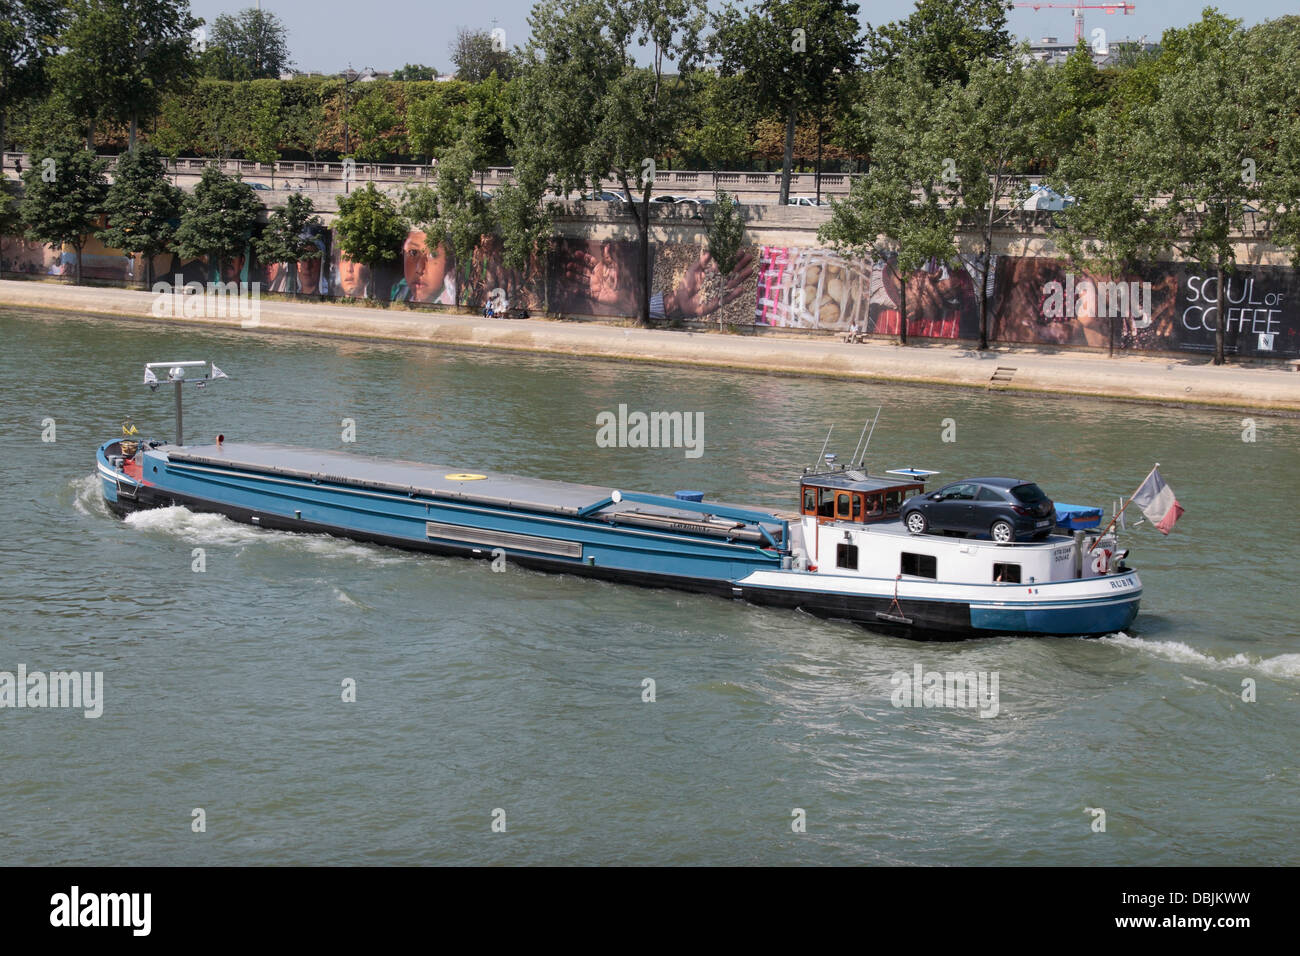 The Rubis river barge with a car on its cabin roof on the River Seine,  Paris, France Stock Photo - Alamy